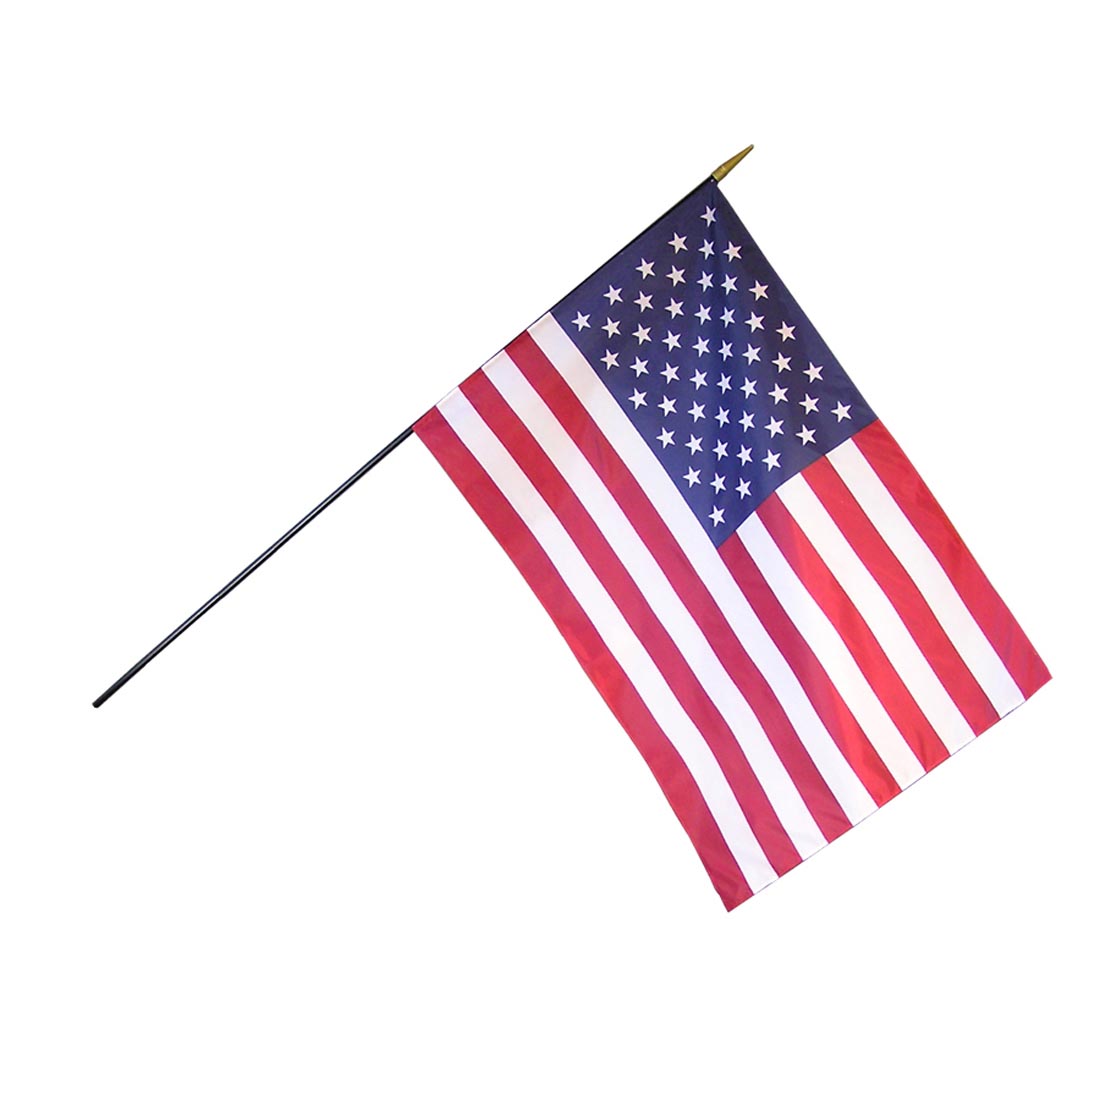 United States of America Flag on a black staff with gold spearhead